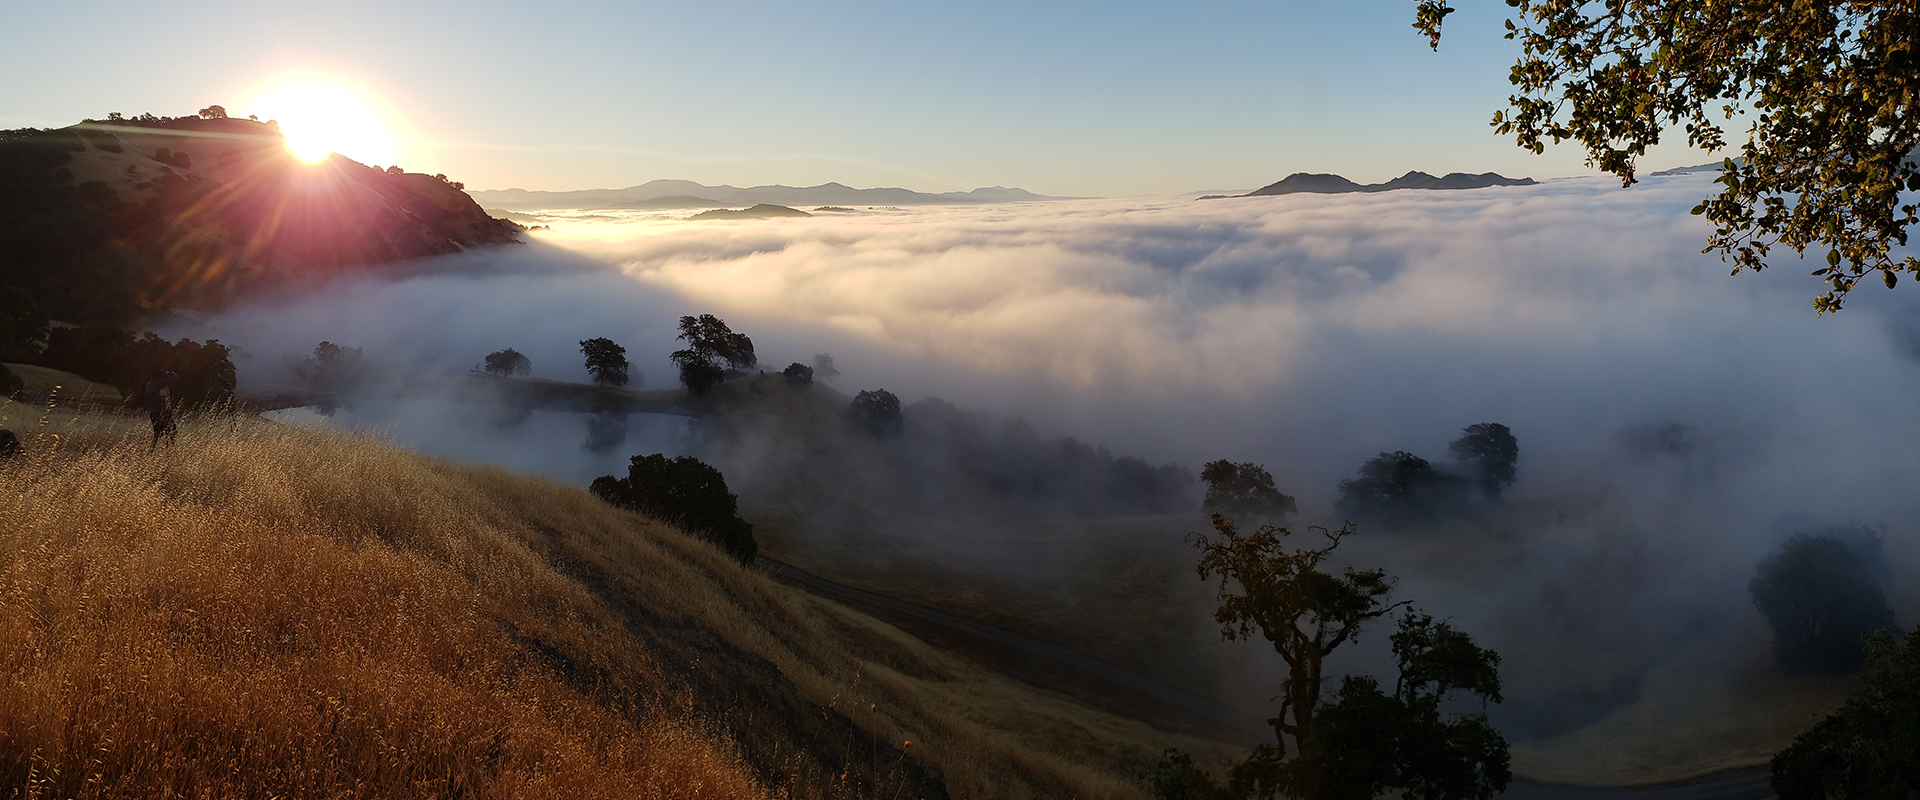 Fog rolling into a vineyard at sunrise with hills, treetops and brown grass.